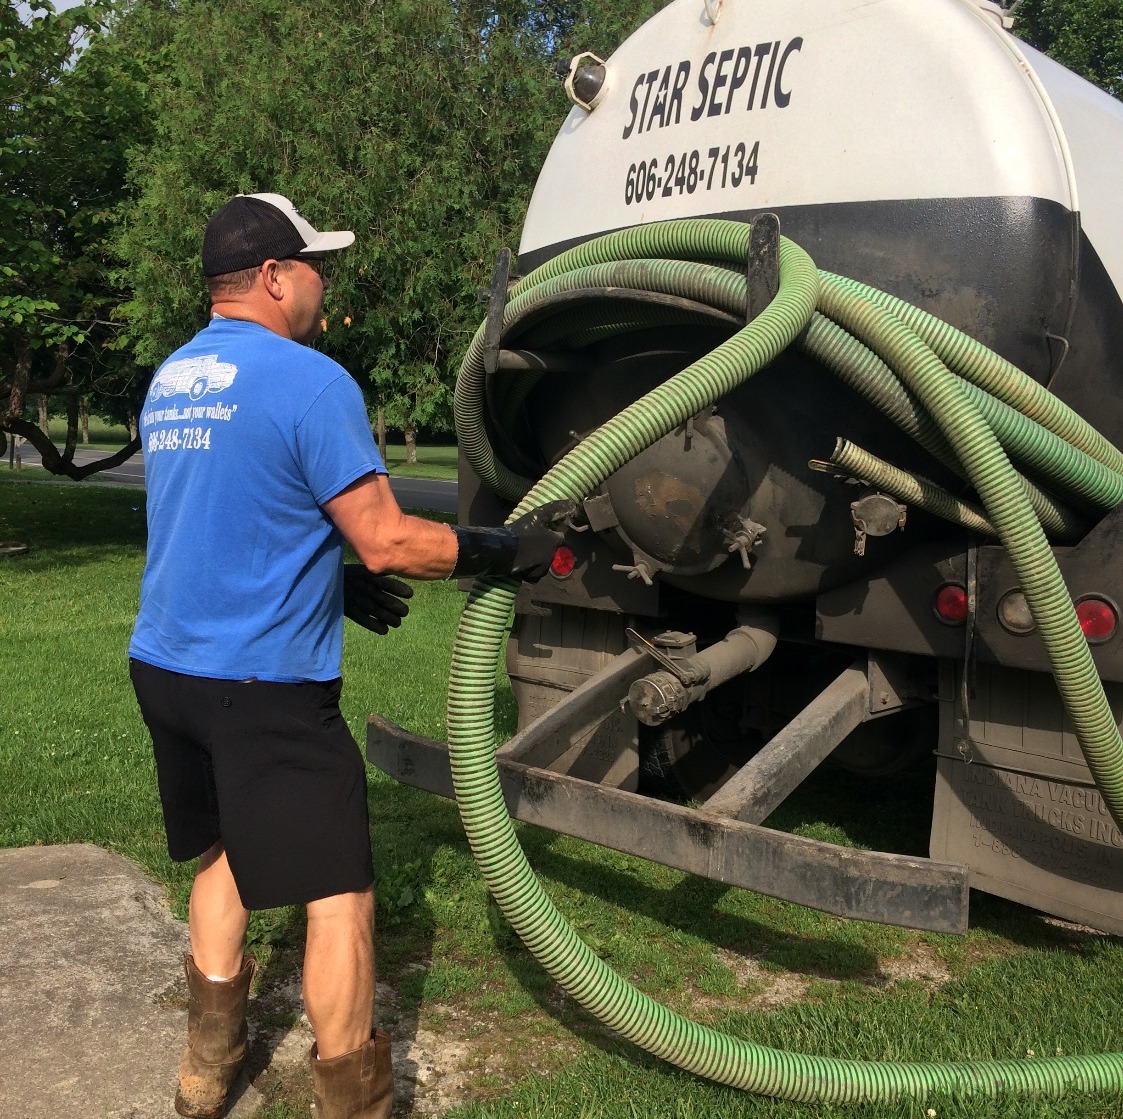 Star Septic Service Star Septic Service Middlesboro (606)248-7134